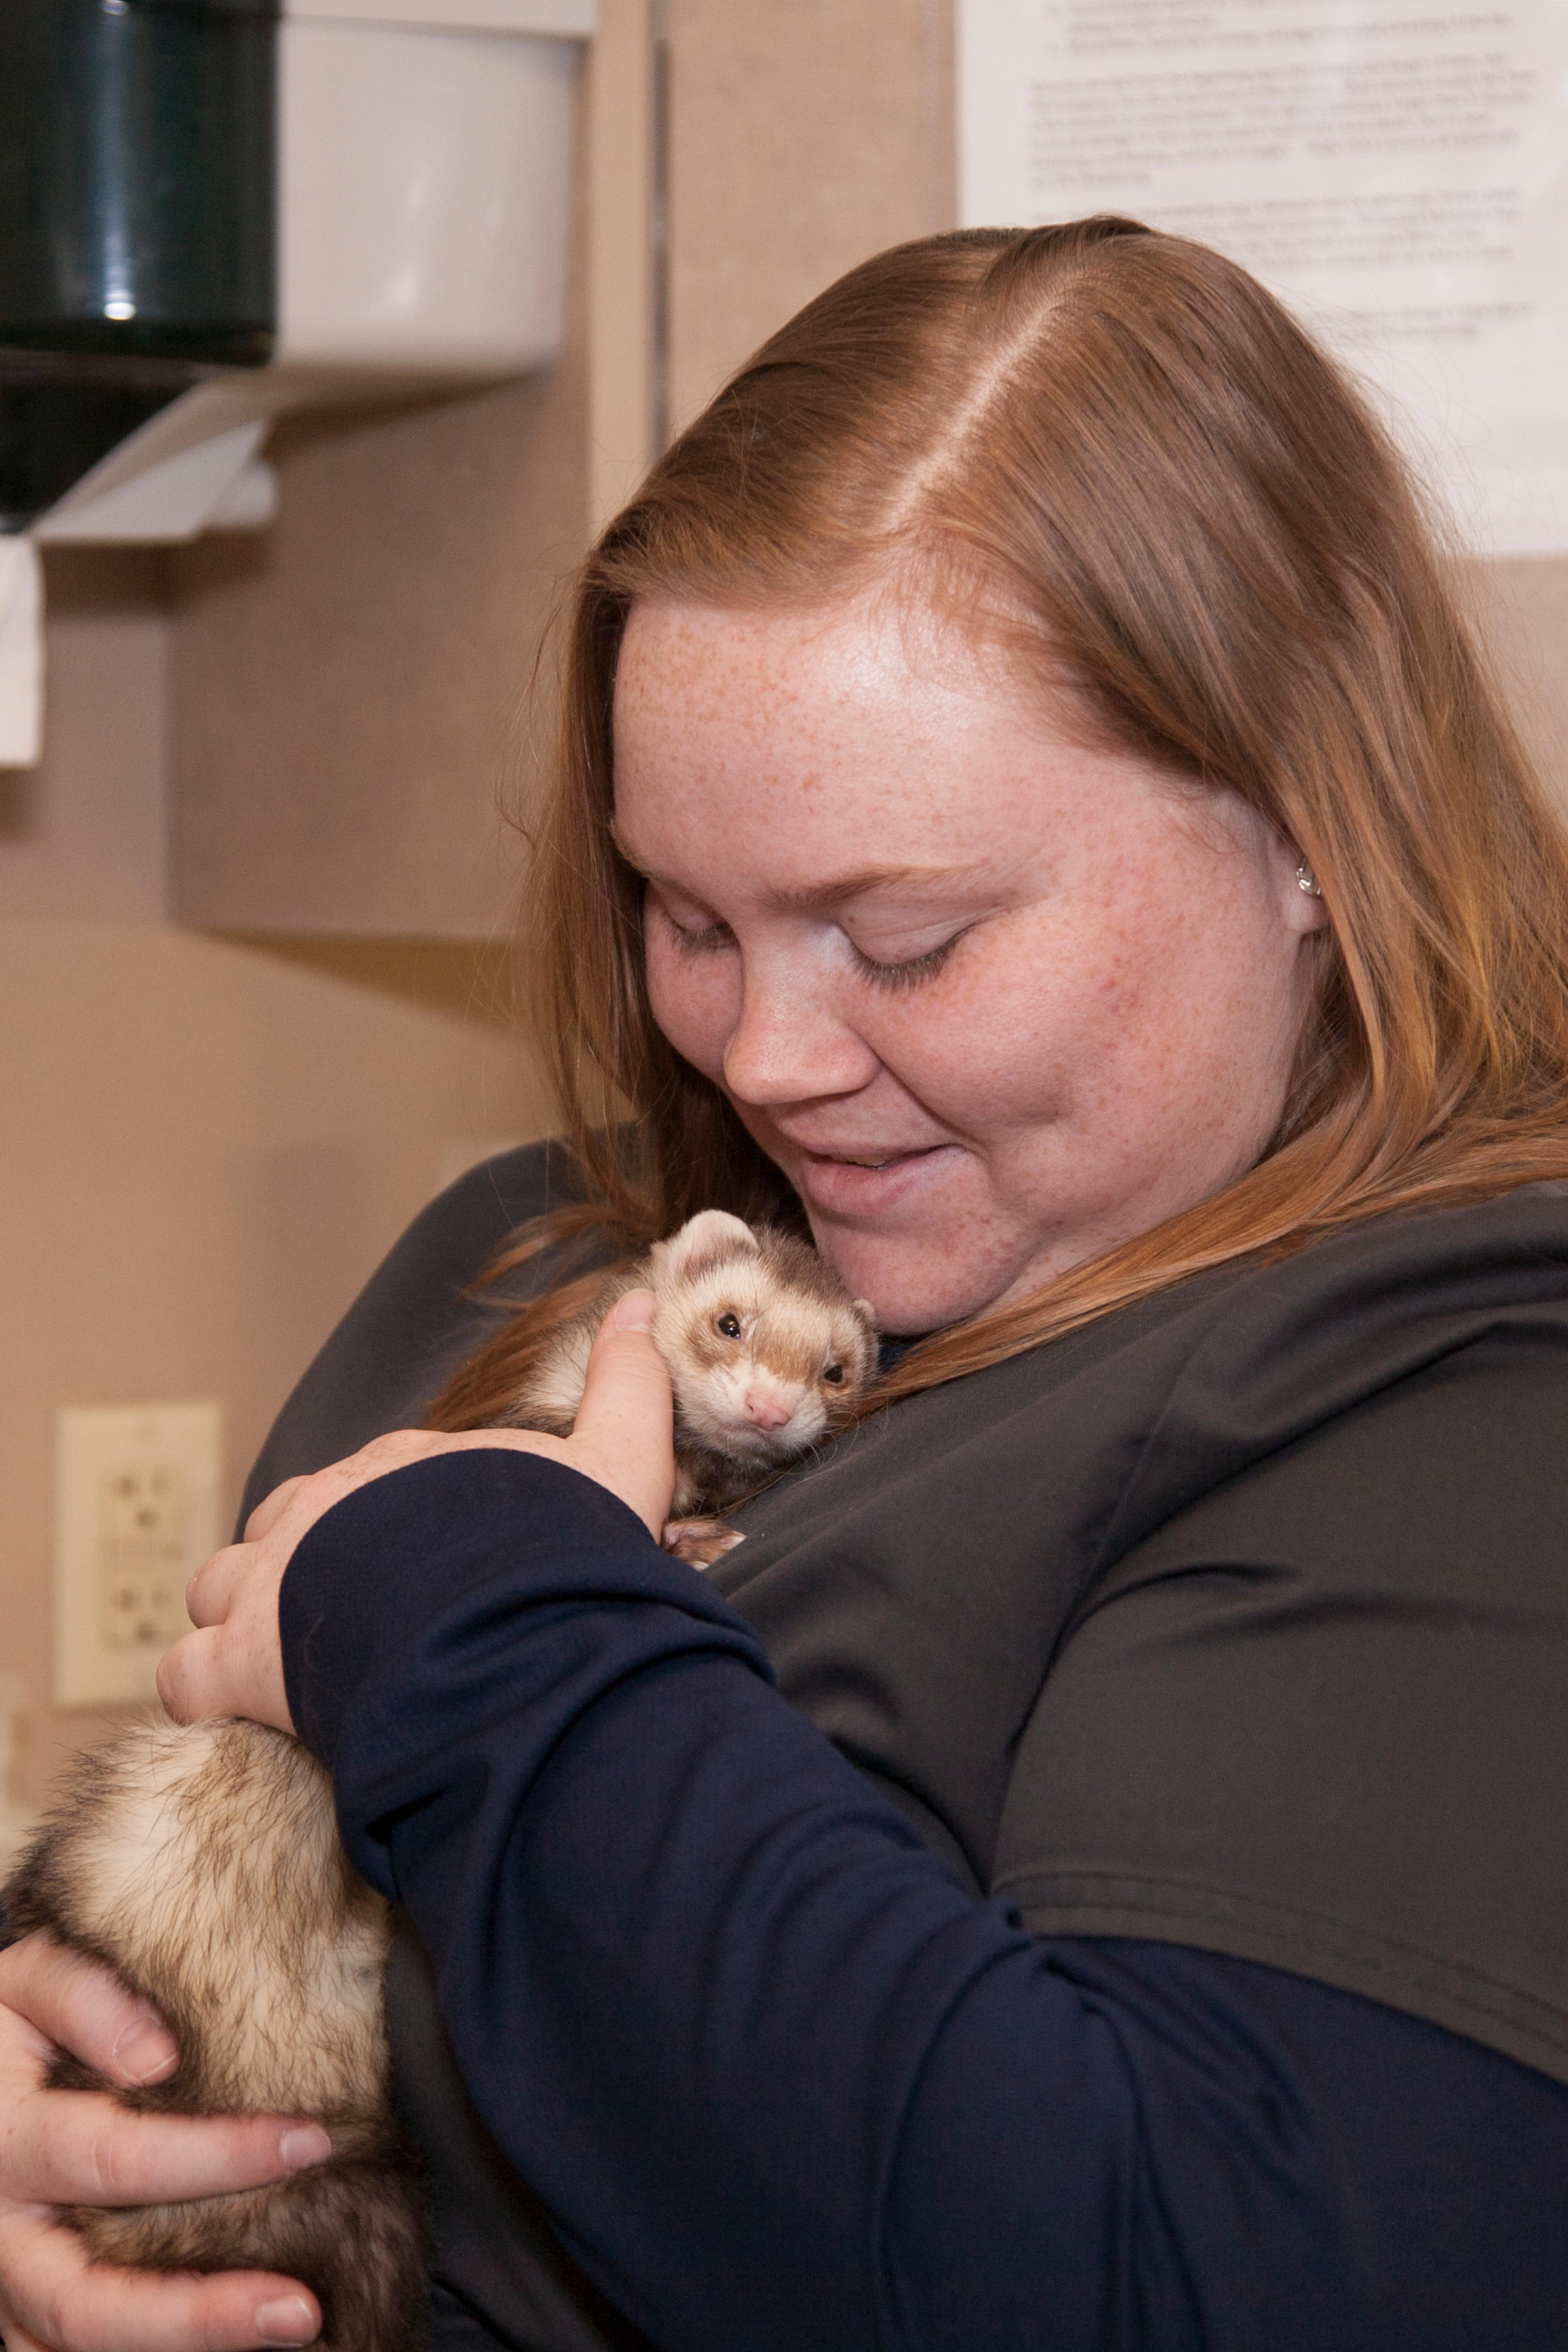 Pocket pets, like this ferret, make great forever friends!